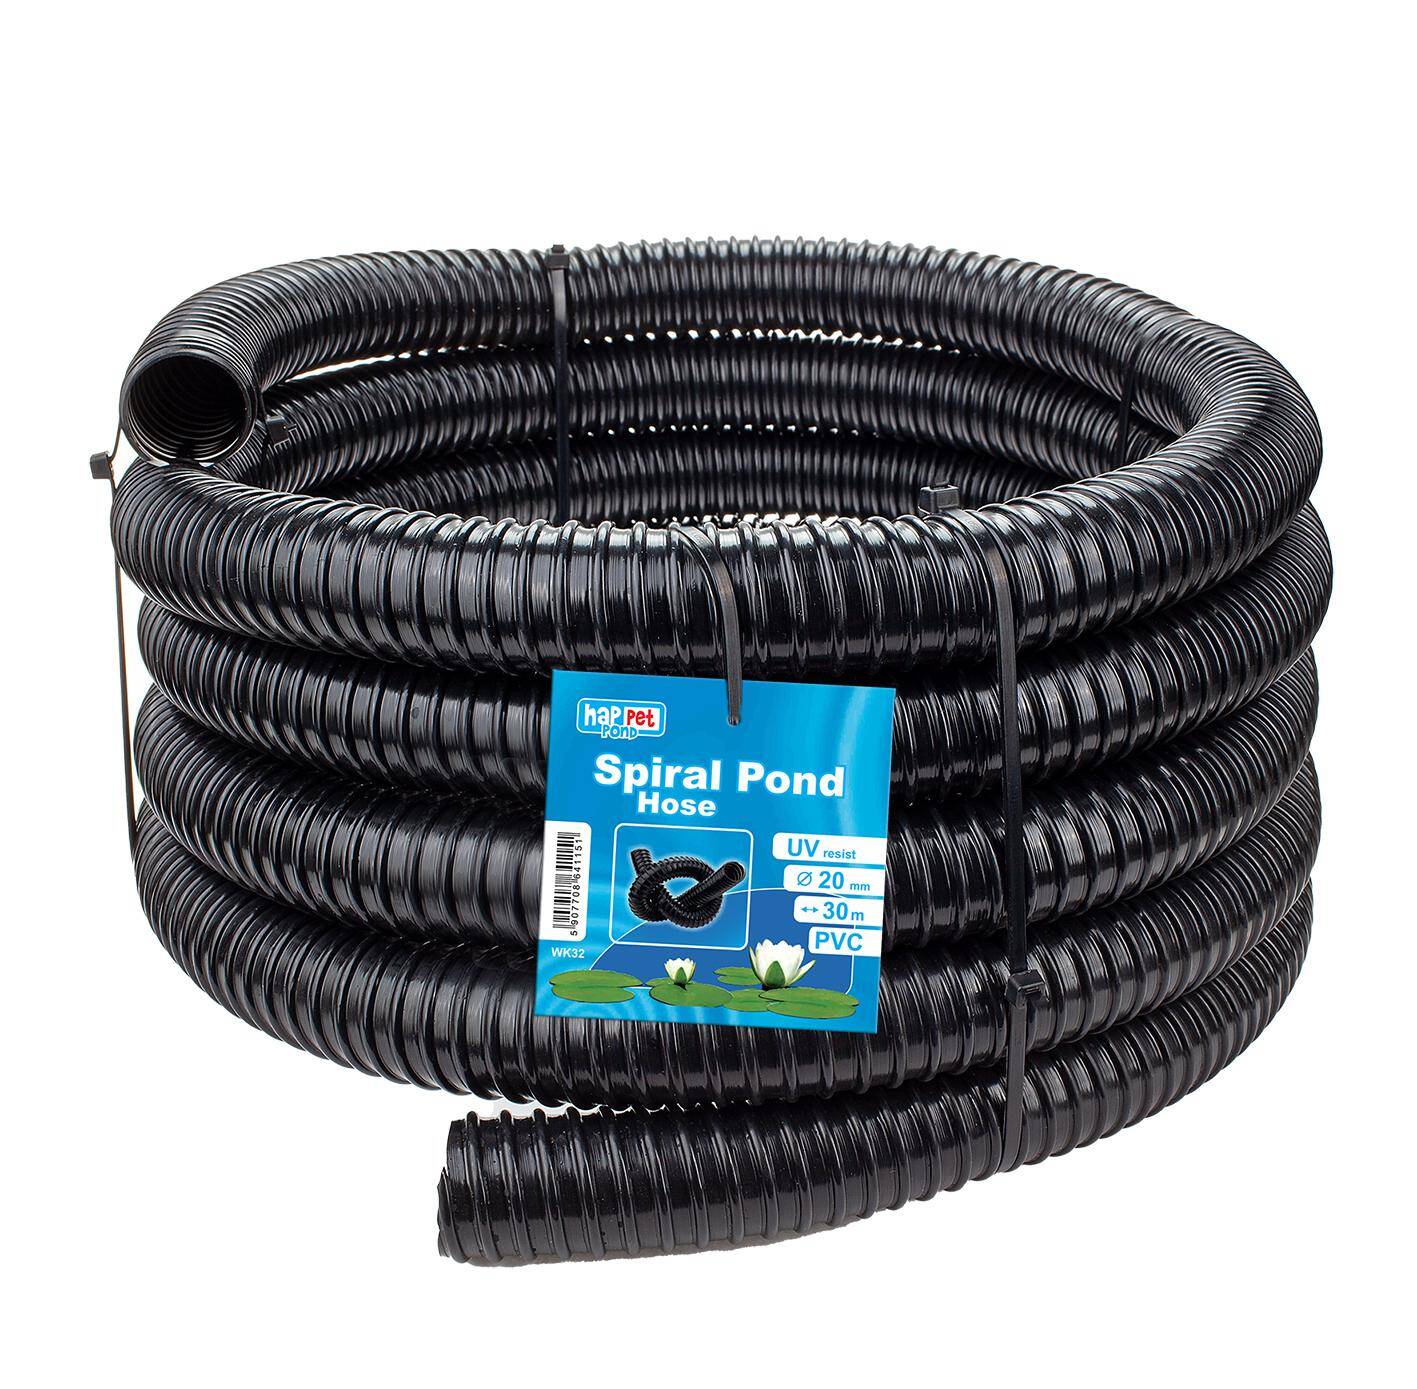 Hosepipe for connections pump-uv lamp-pond. Corrugated, black, bendresistable. Roll 30m